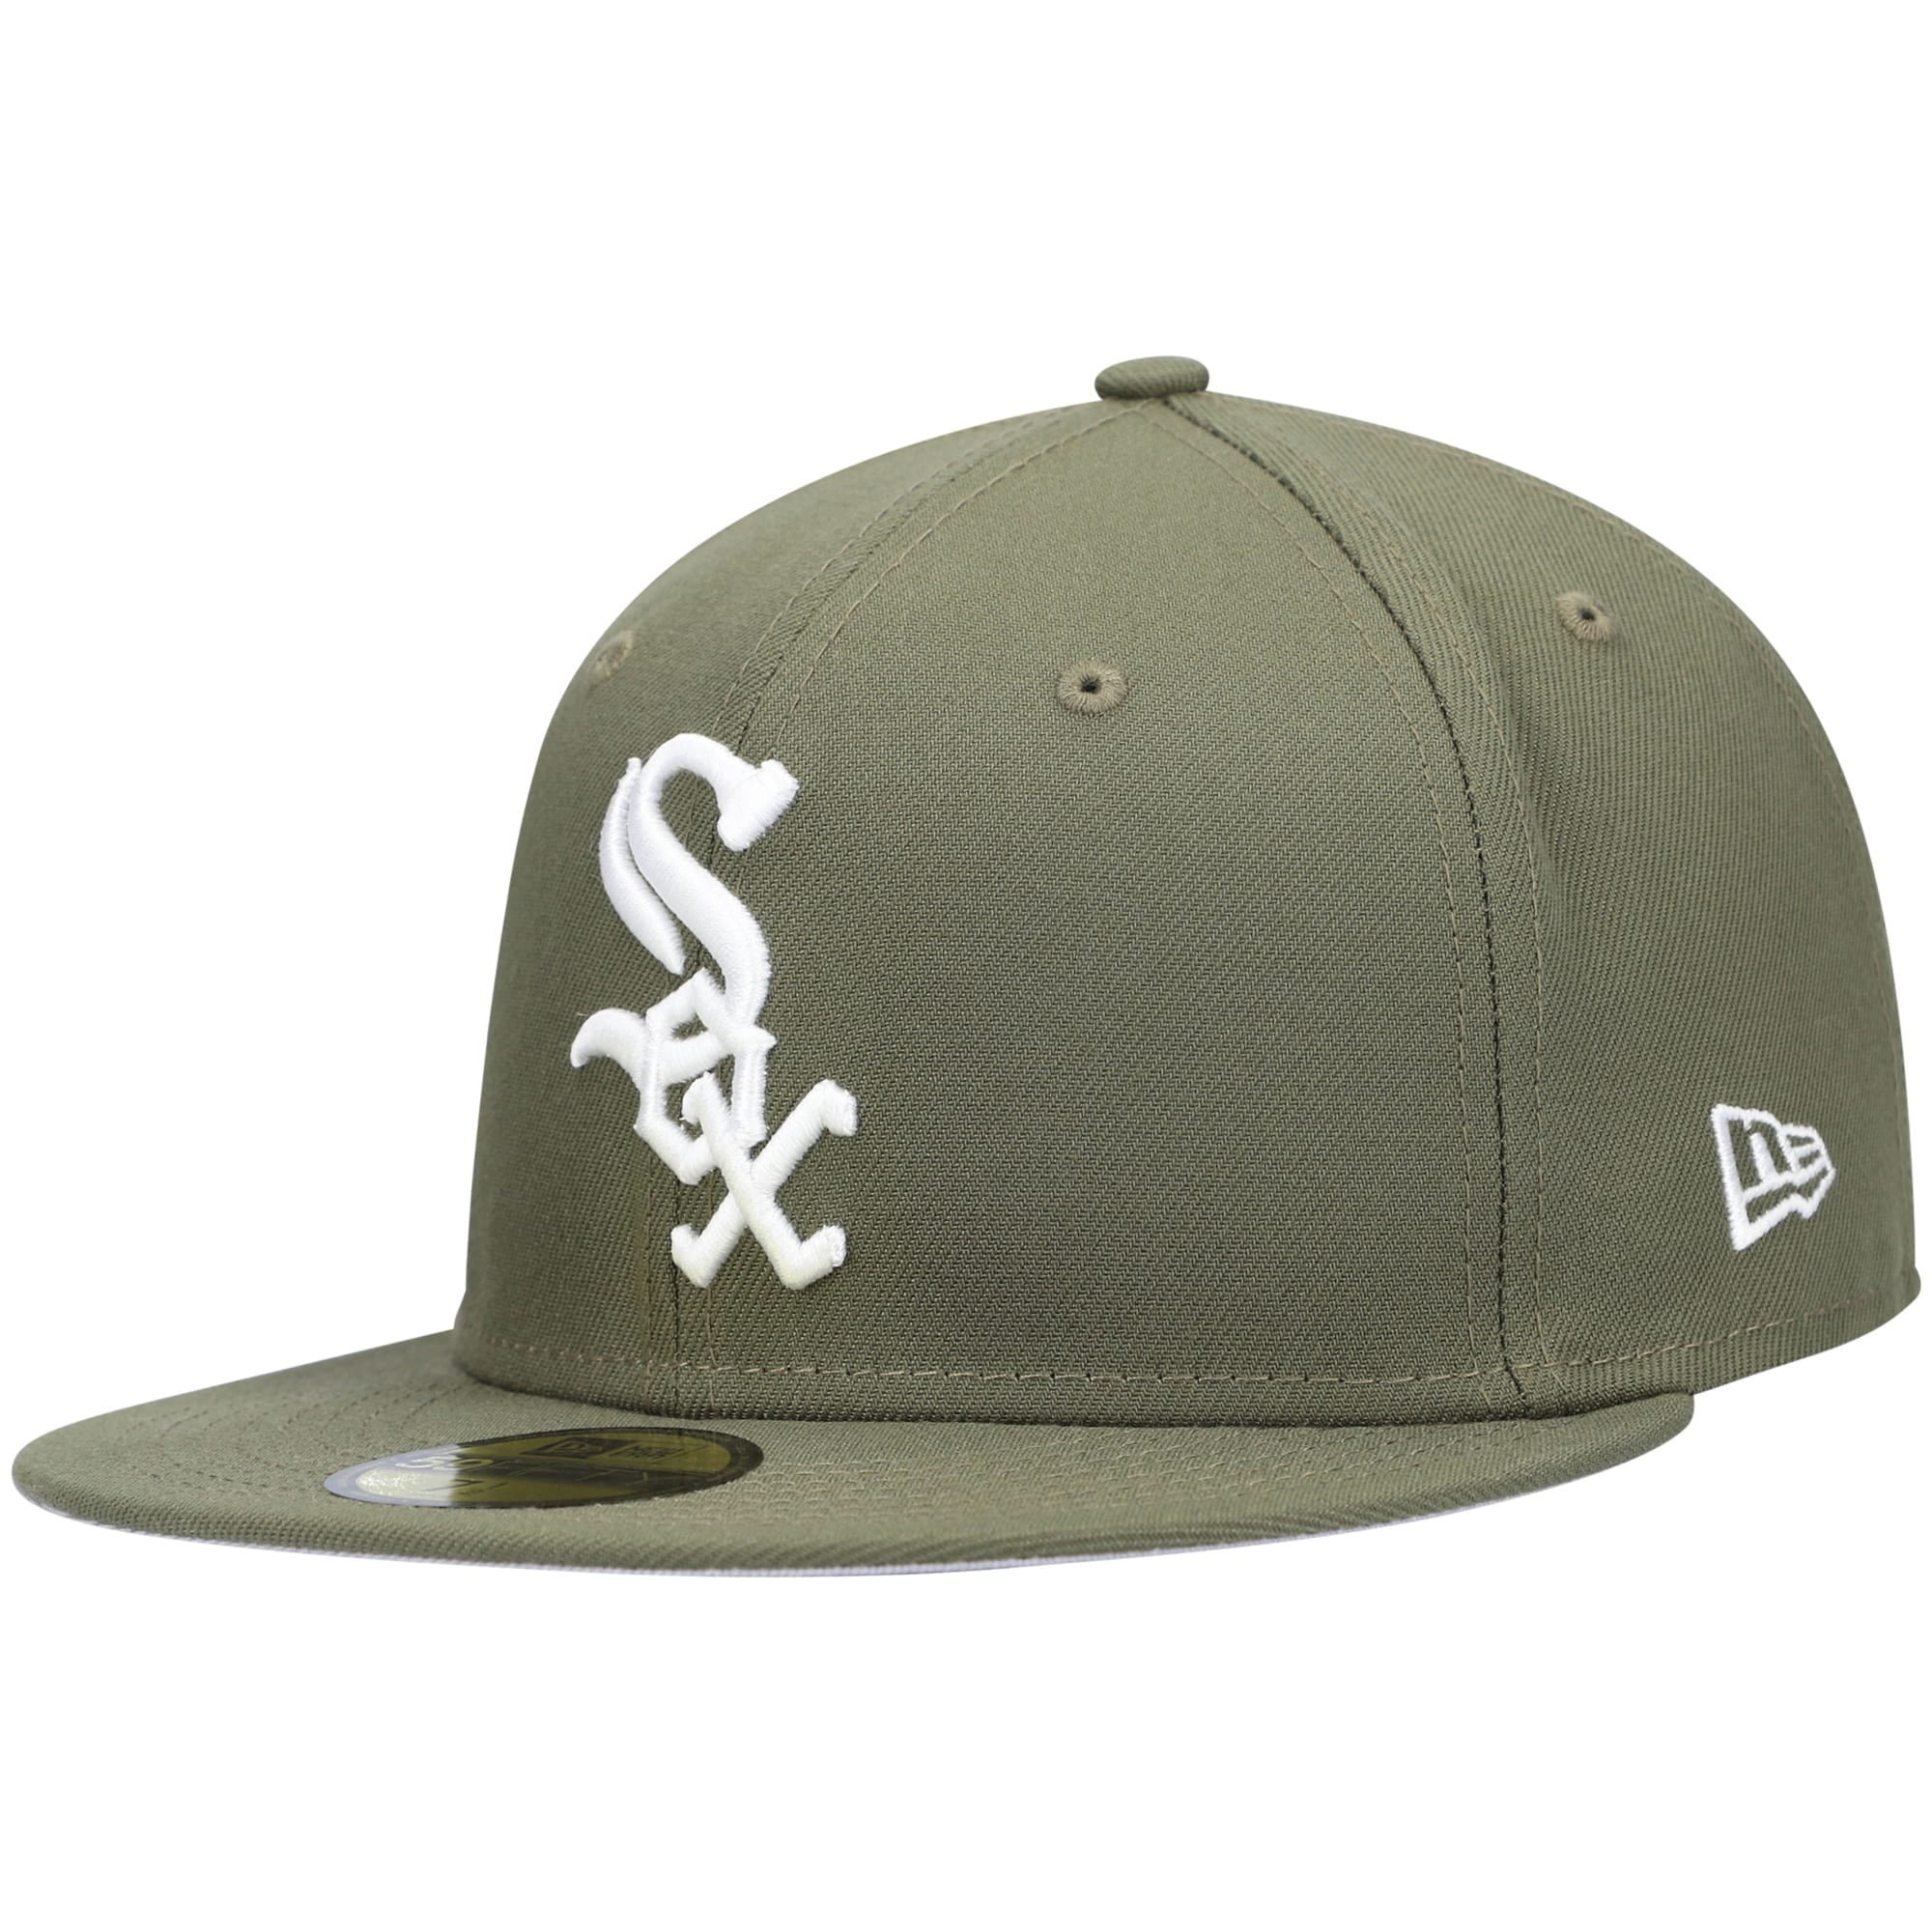  MLB Chicago White Sox Black with Scarlet and White 59FIFTY  Fitted Cap : Sports Fan Baseball Caps : Sports & Outdoors